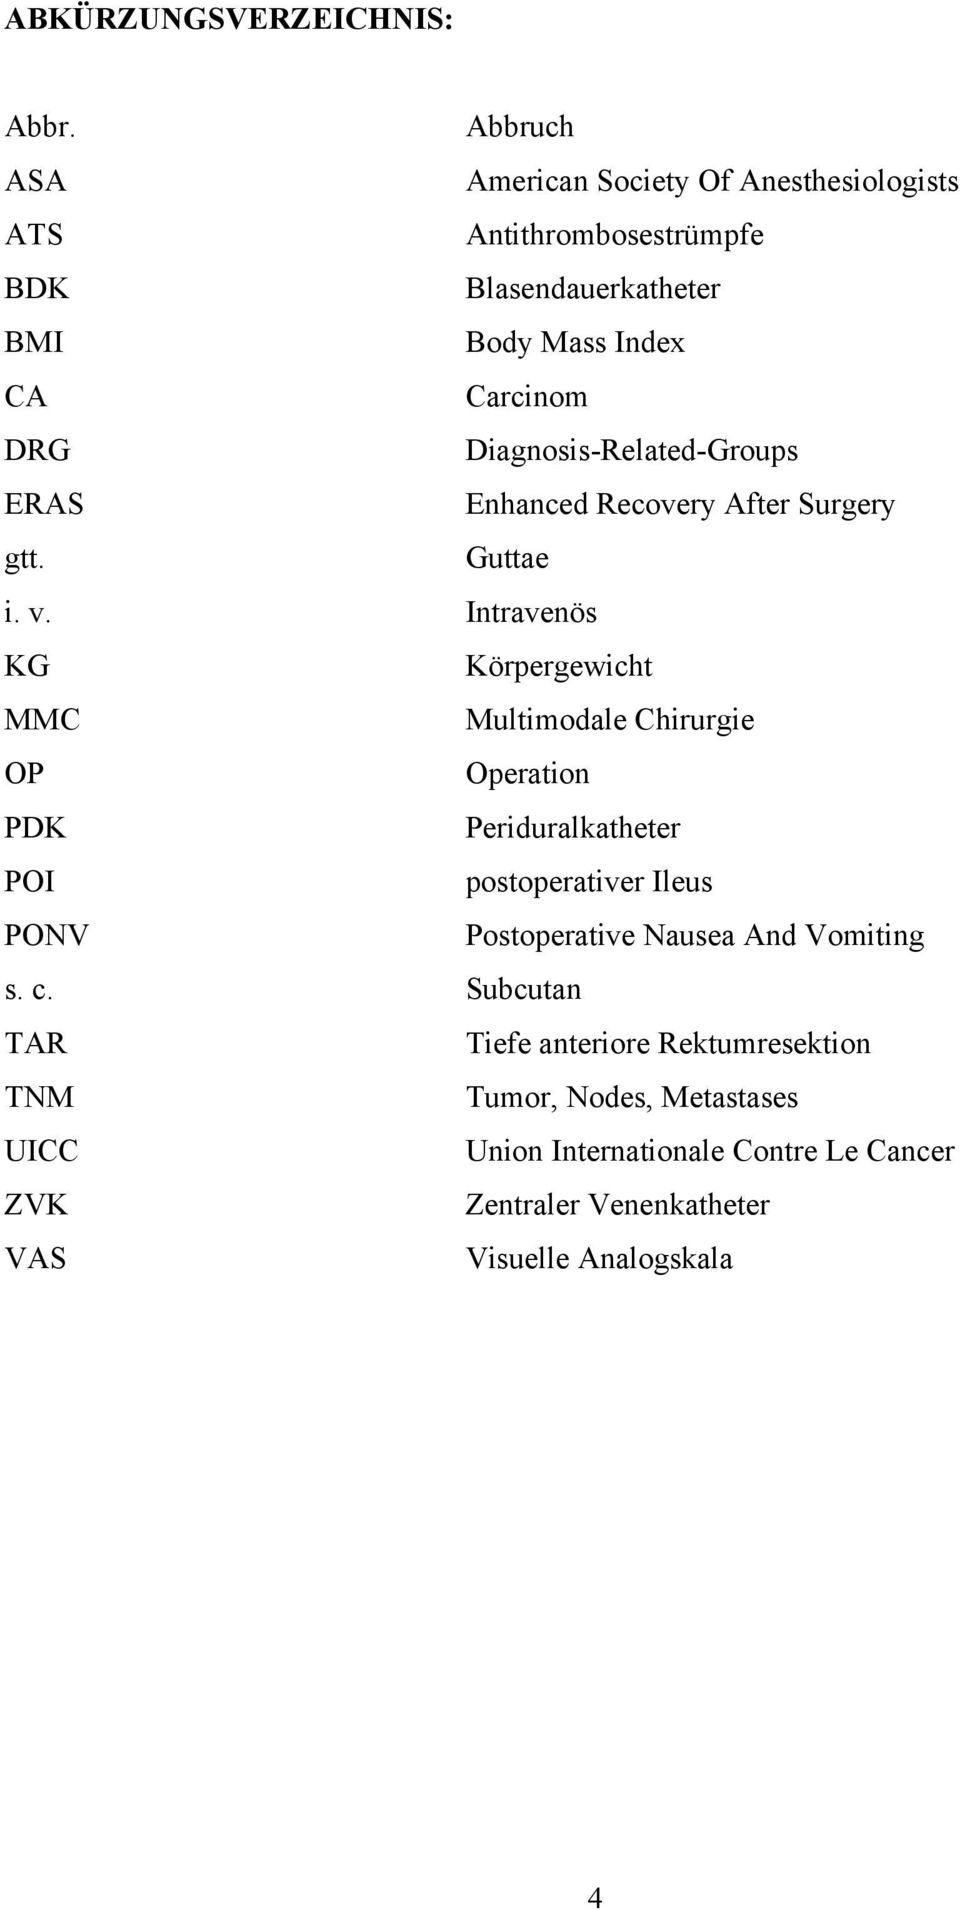 Diagnosis-Related-Groups ERAS Enhanced Recovery After Surgery gtt. Guttae i. v.